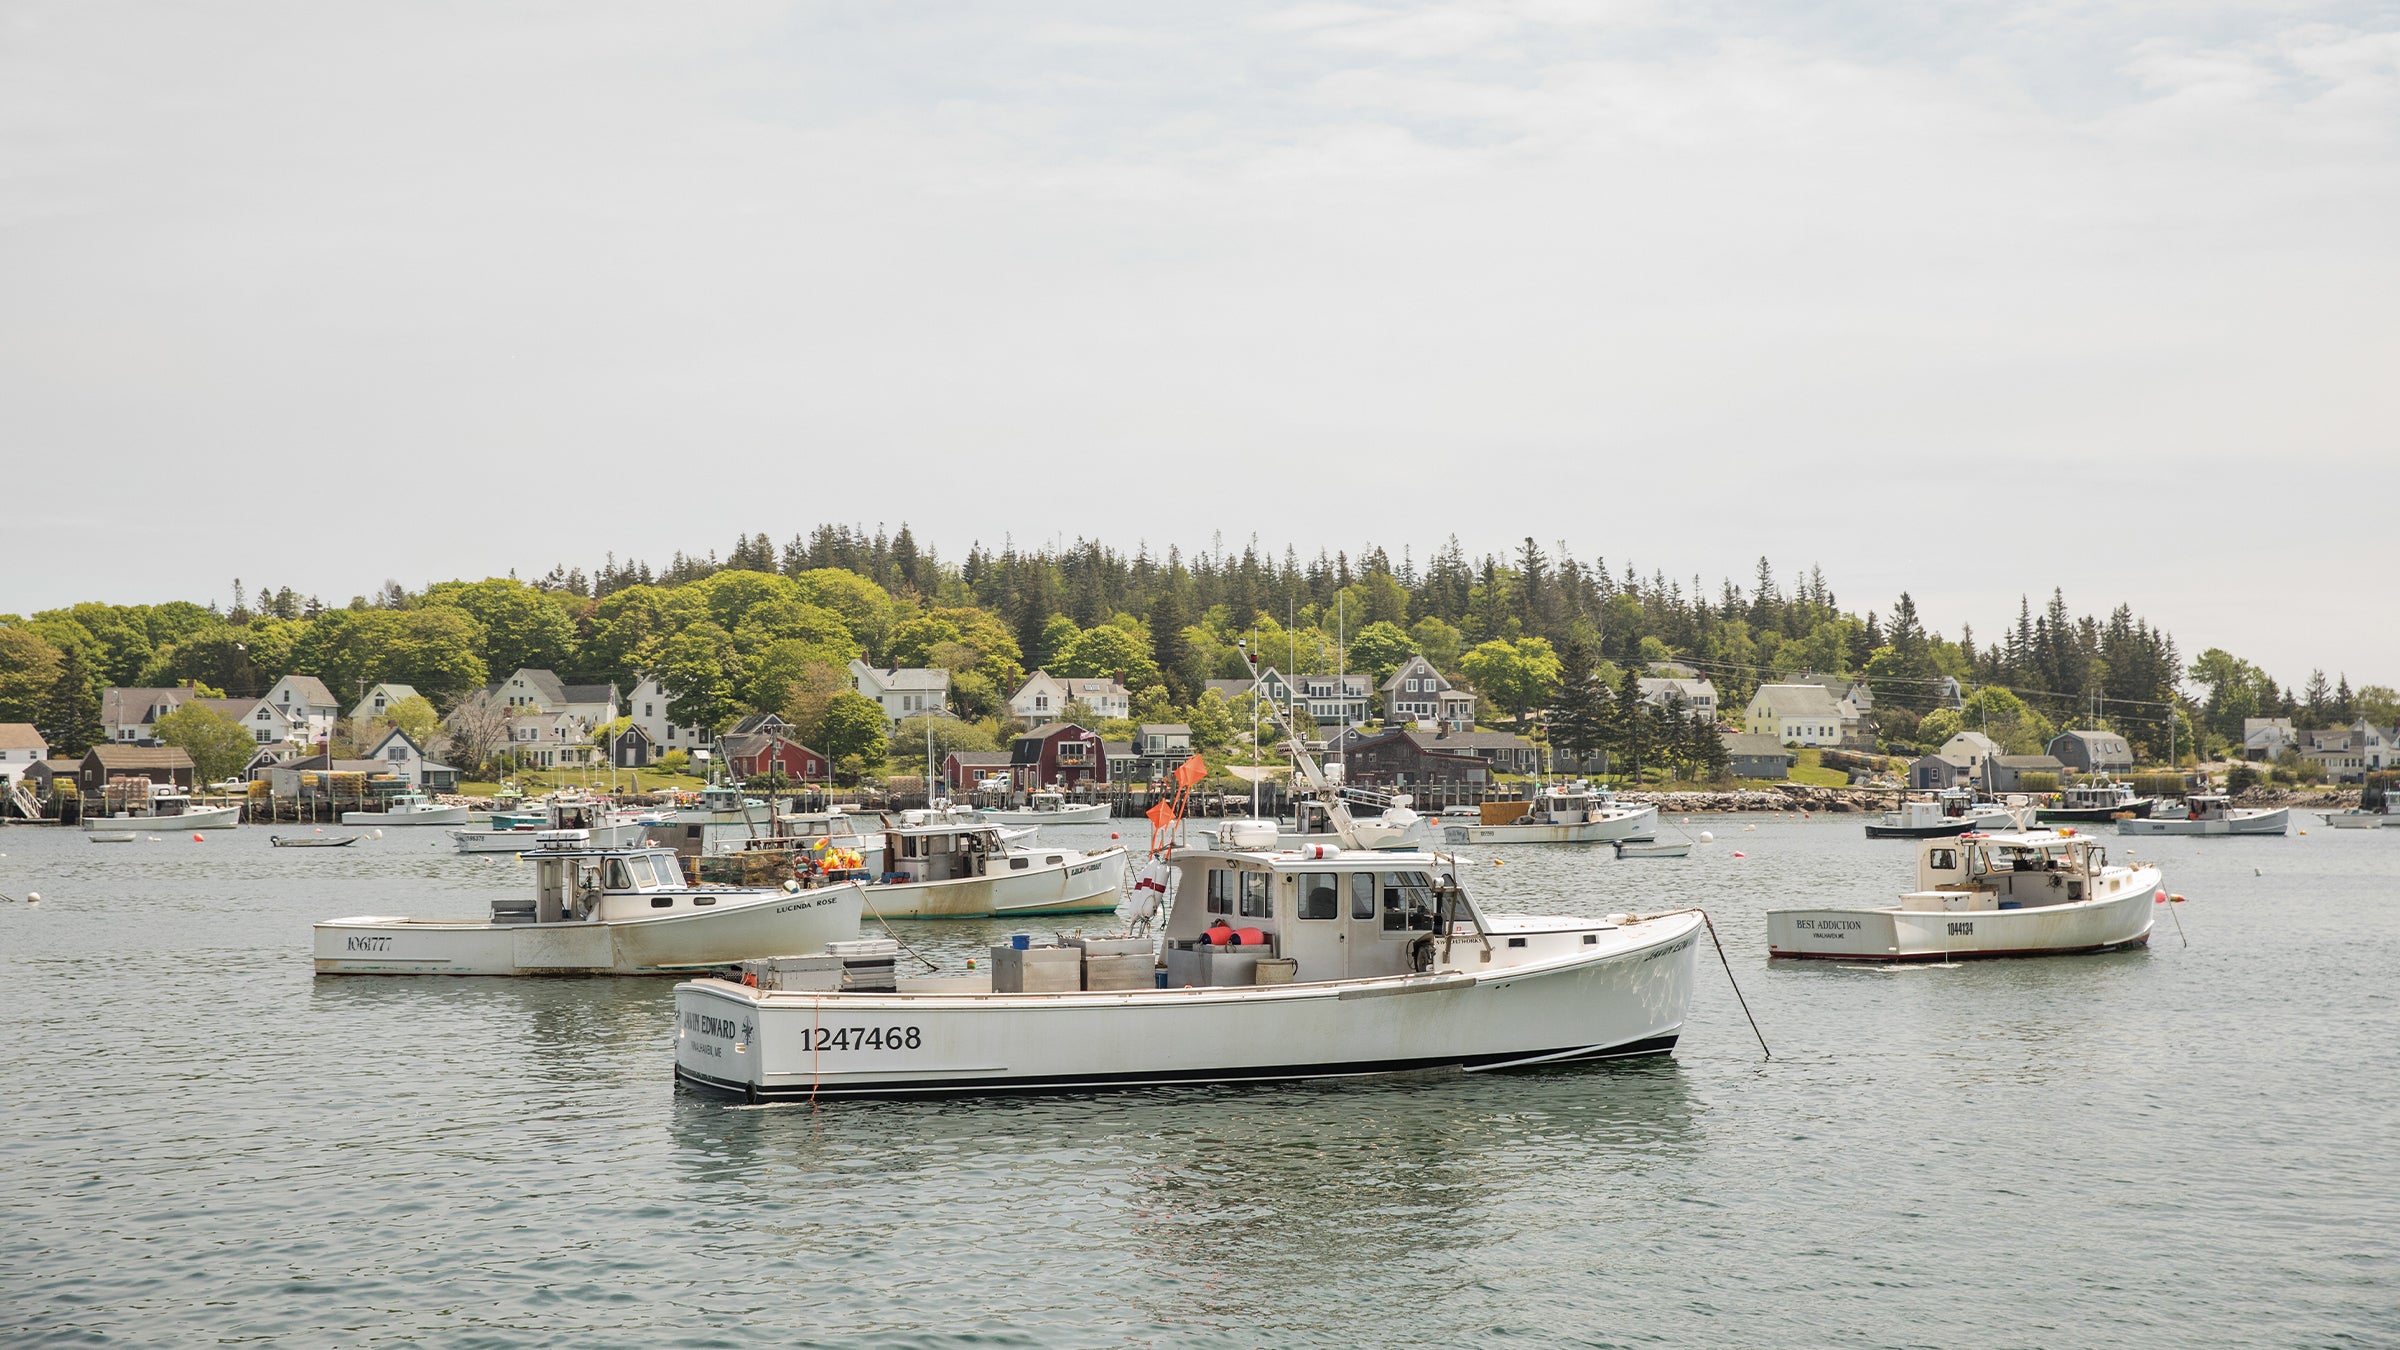 It's about time: Good on Islanders for bringing back Fisherman, Op-ed